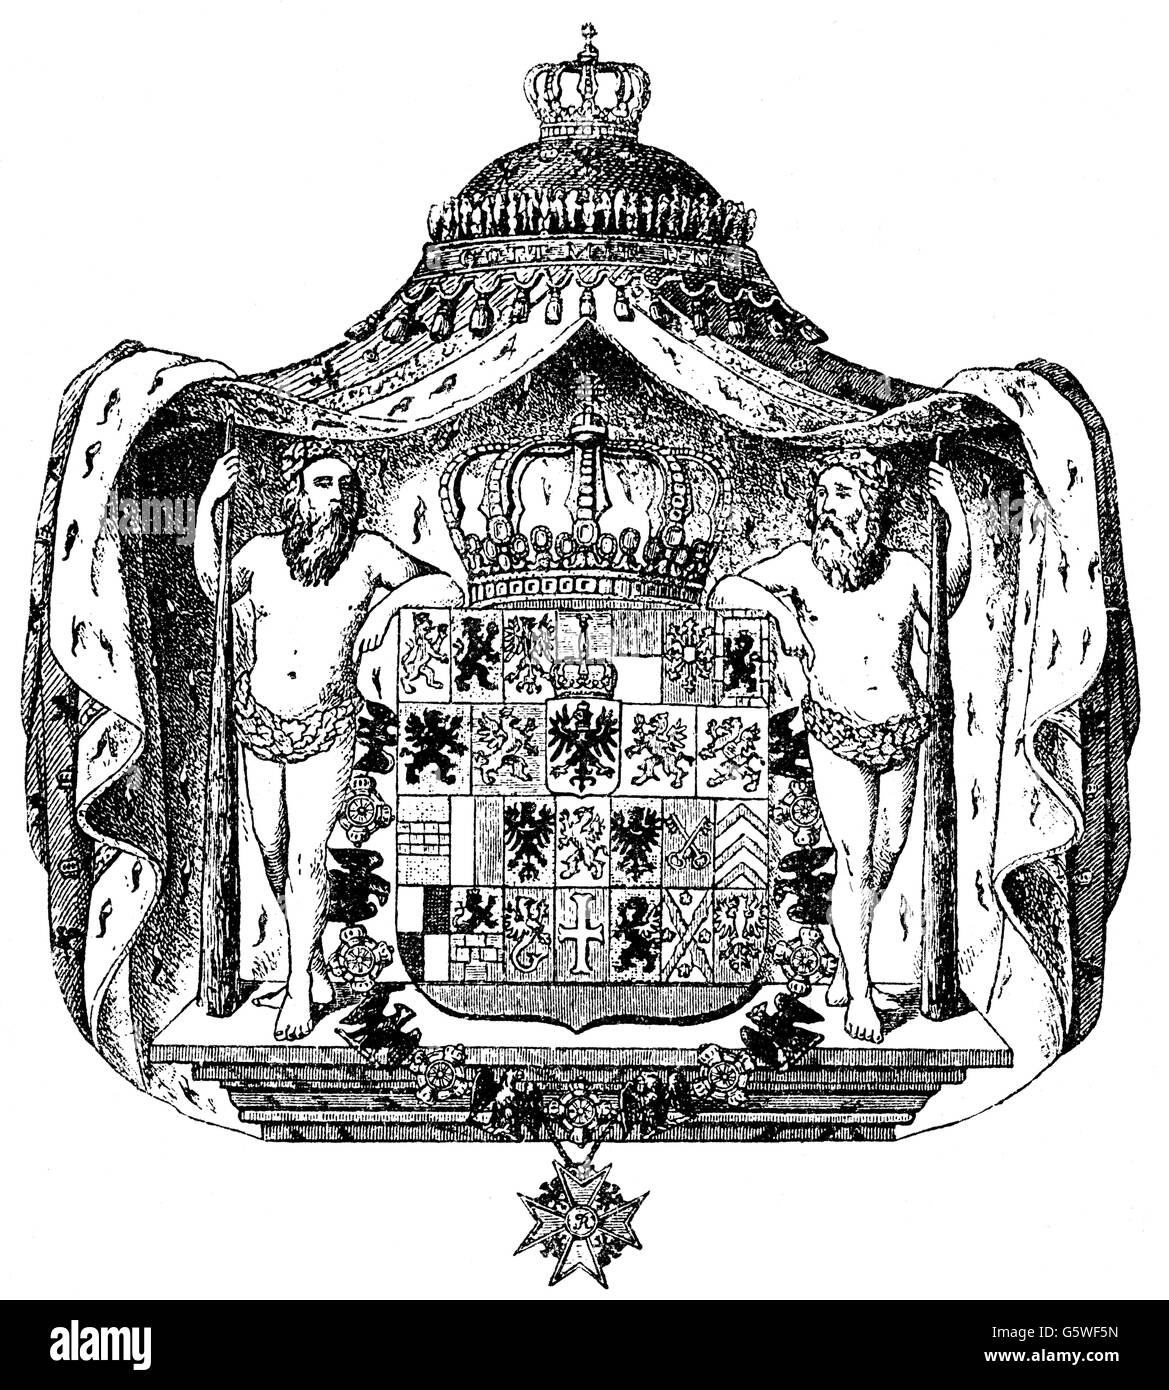 heraldry, coat of arms, Germany, state coat of arms of the Kingdom of Prussia, 1701, Additional-Rights-Clearences-Not Available Stock Photo